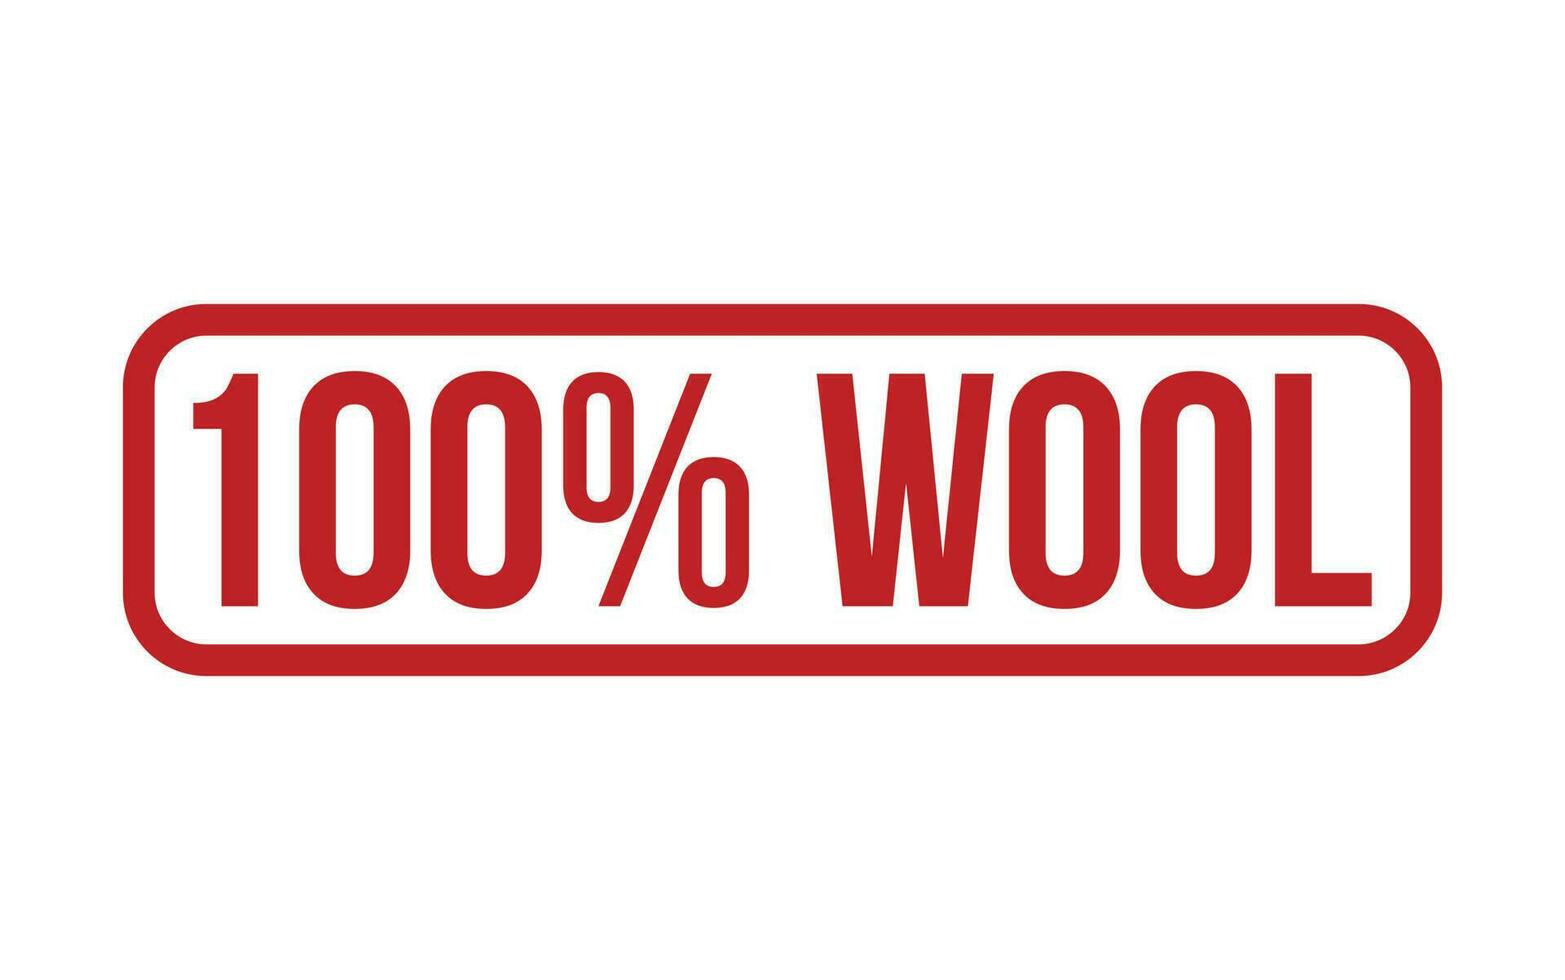 100 Percent Wool Rubber Stamp Seal Vector